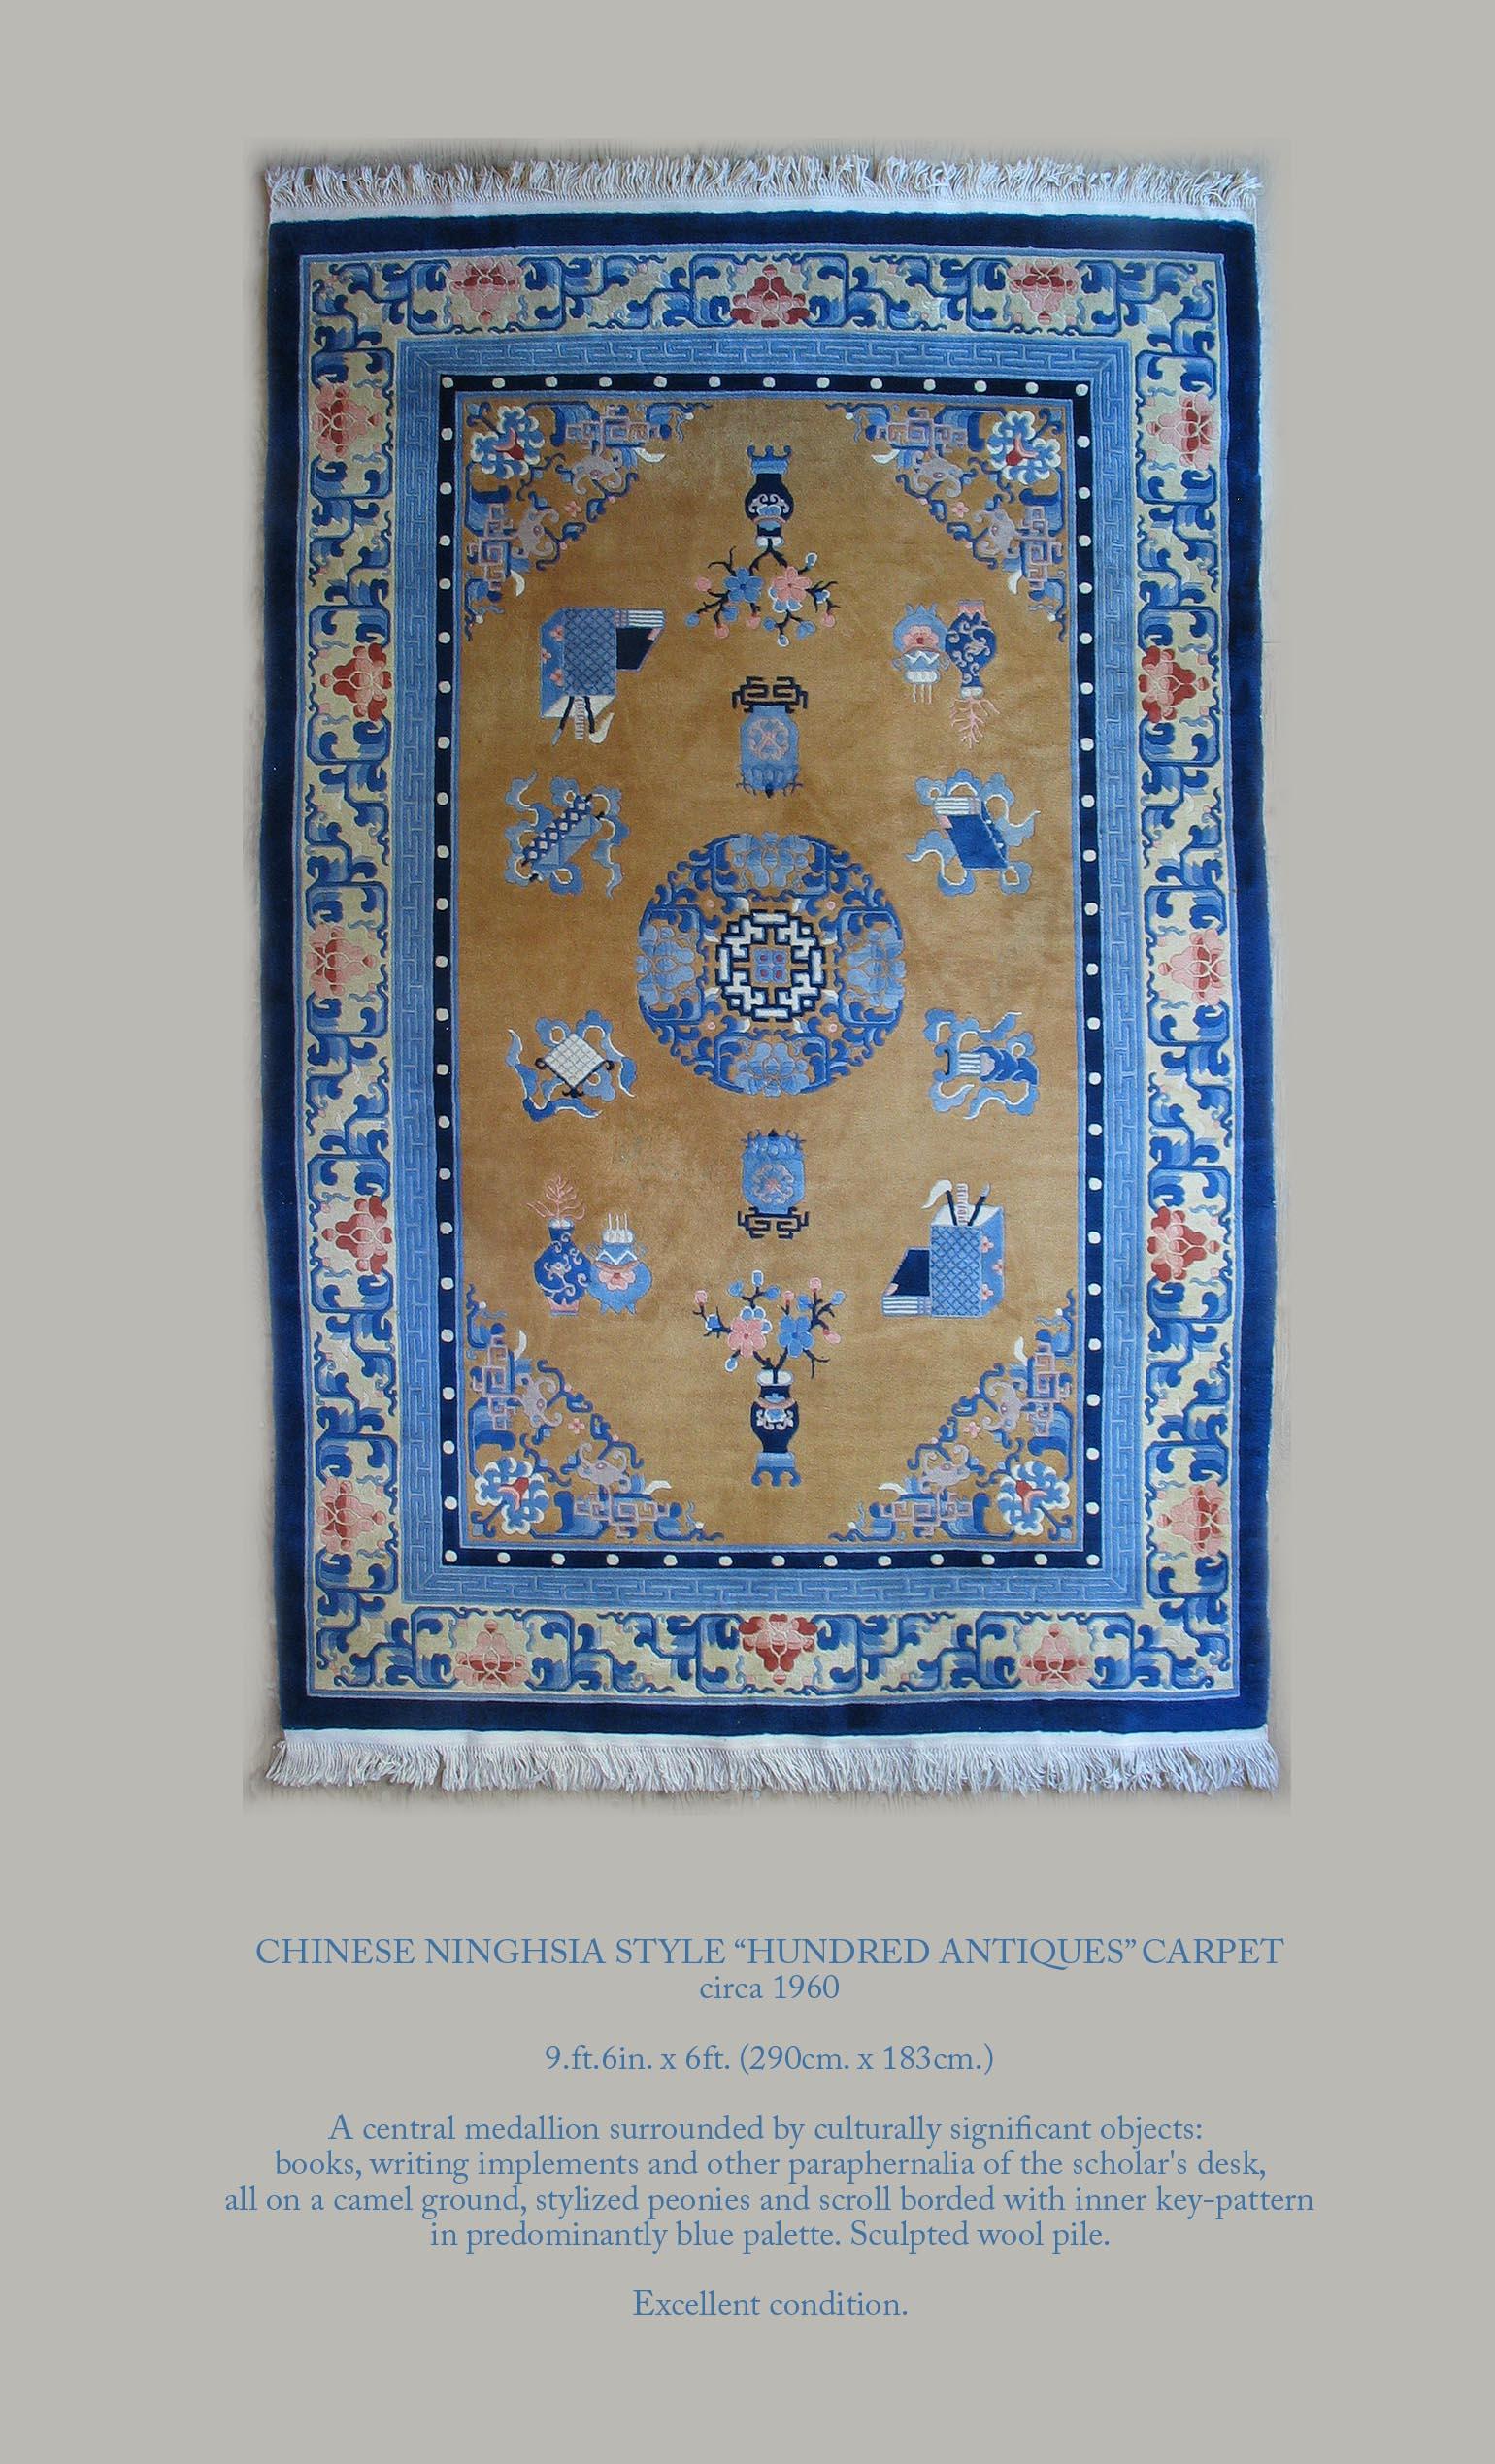 Chinese Ninghsia style “Hundred Antiques” carpet
circa 1960.

Measures 9.ft.6in. x 6ft. (290cm. x 183cm.)

A central medallion surrounded by culturally significant objects: 
books, writing implements and other paraphernalia of the scholar's